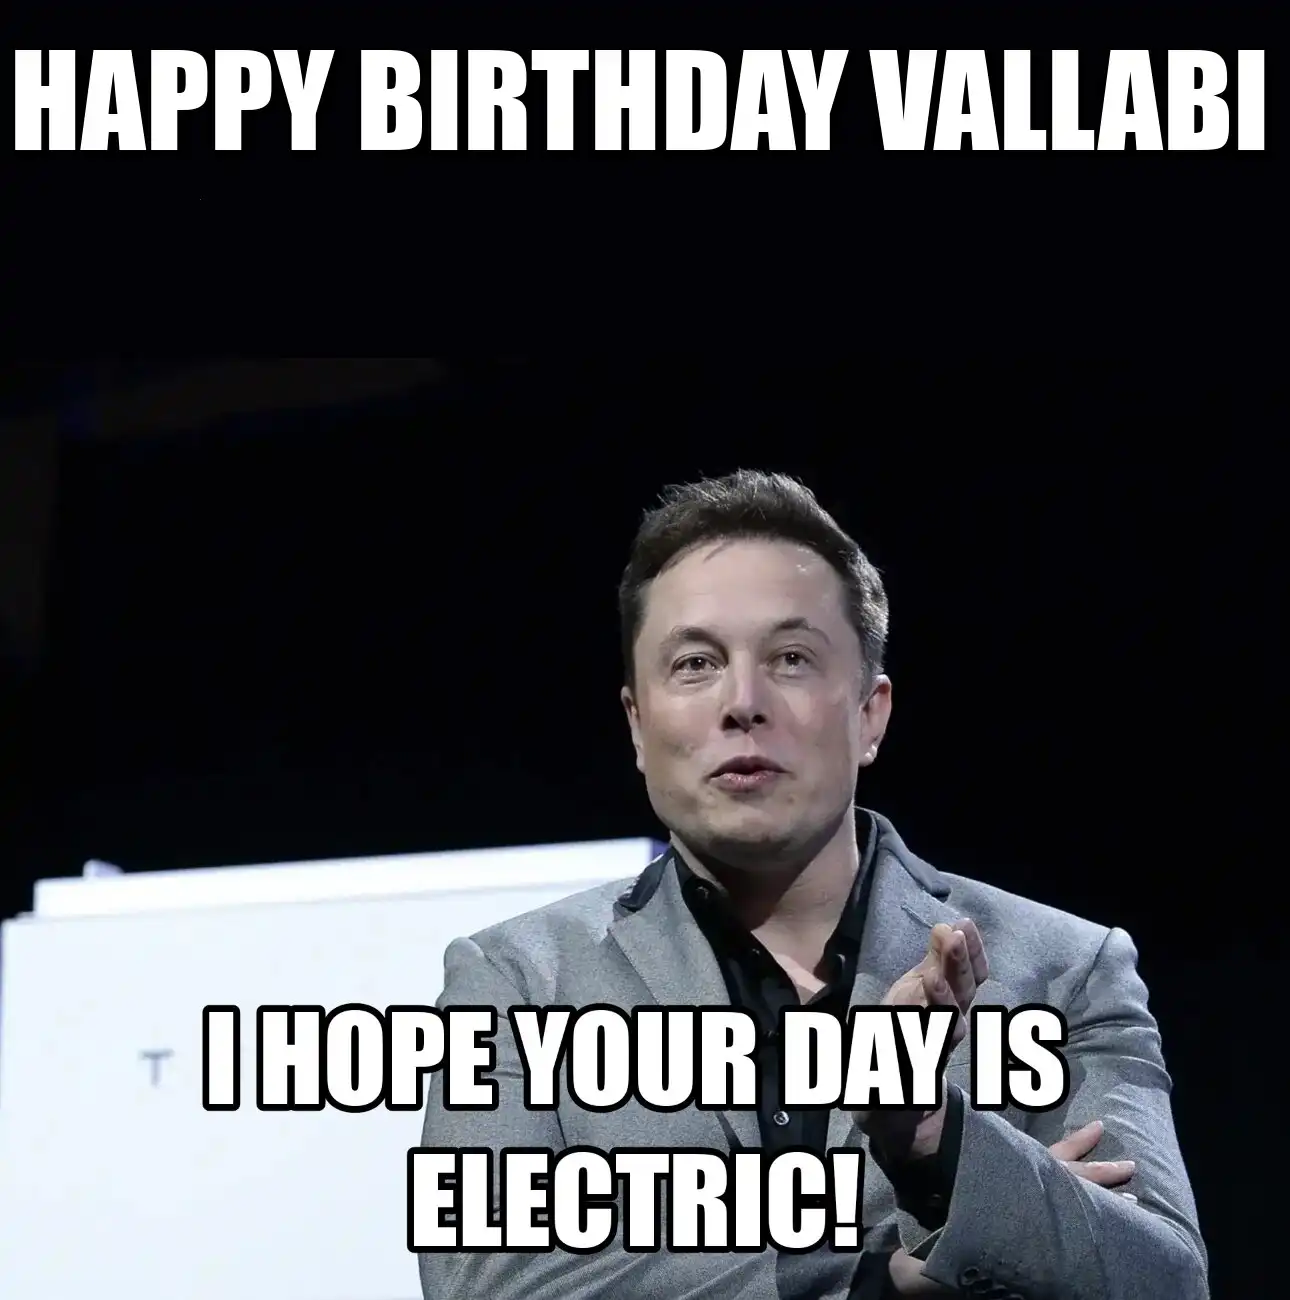 Happy Birthday Vallabi I Hope Your Day Is Electric Meme